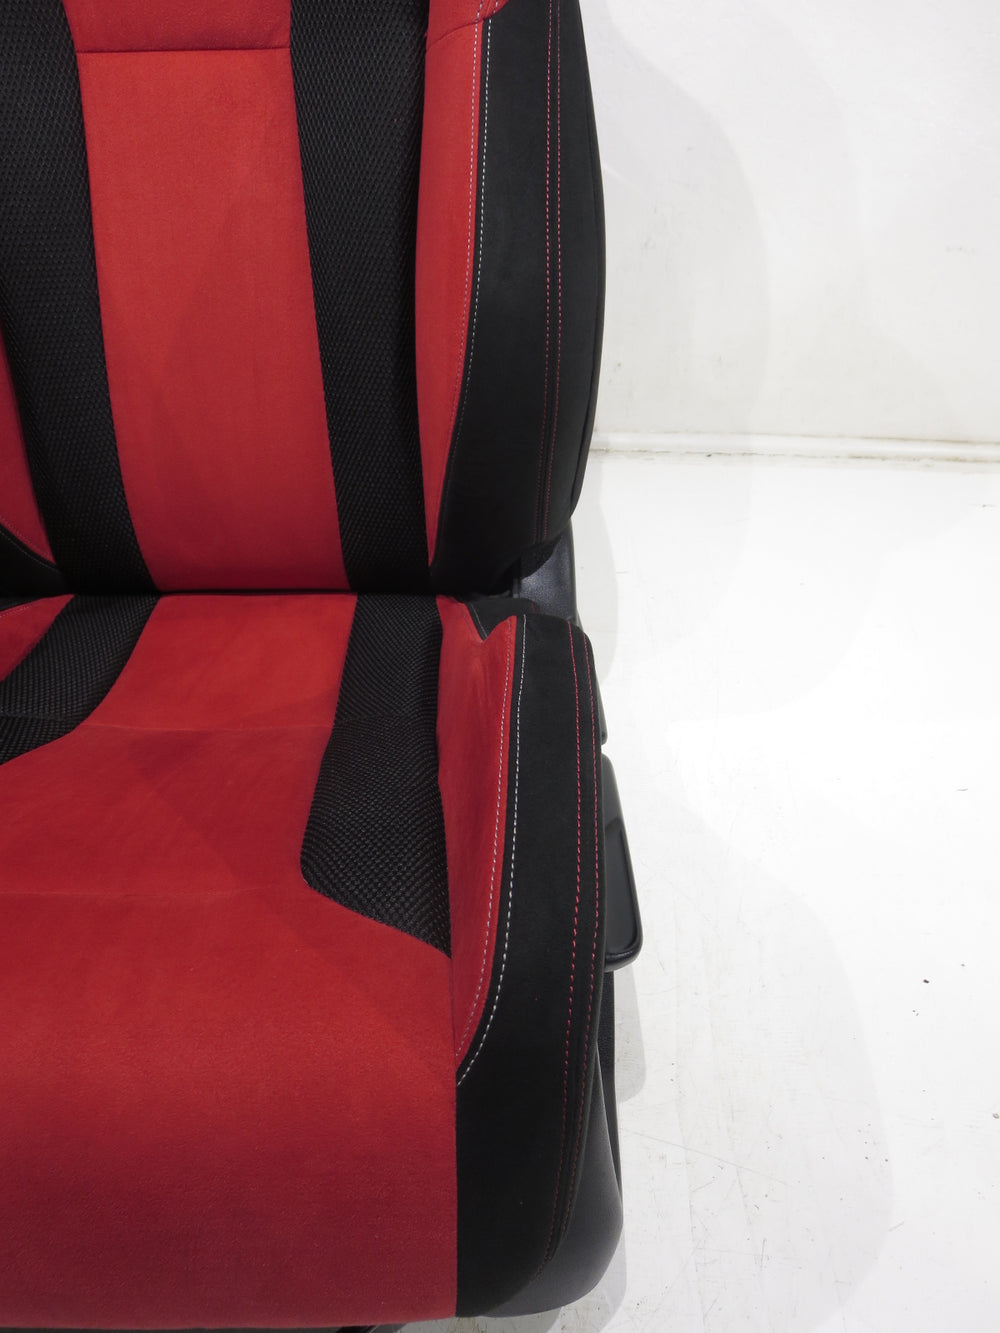 2016 - 2021 Honda Civic Type R Front Seats Black & Red #2621 | Picture # 8 | OEM Seats